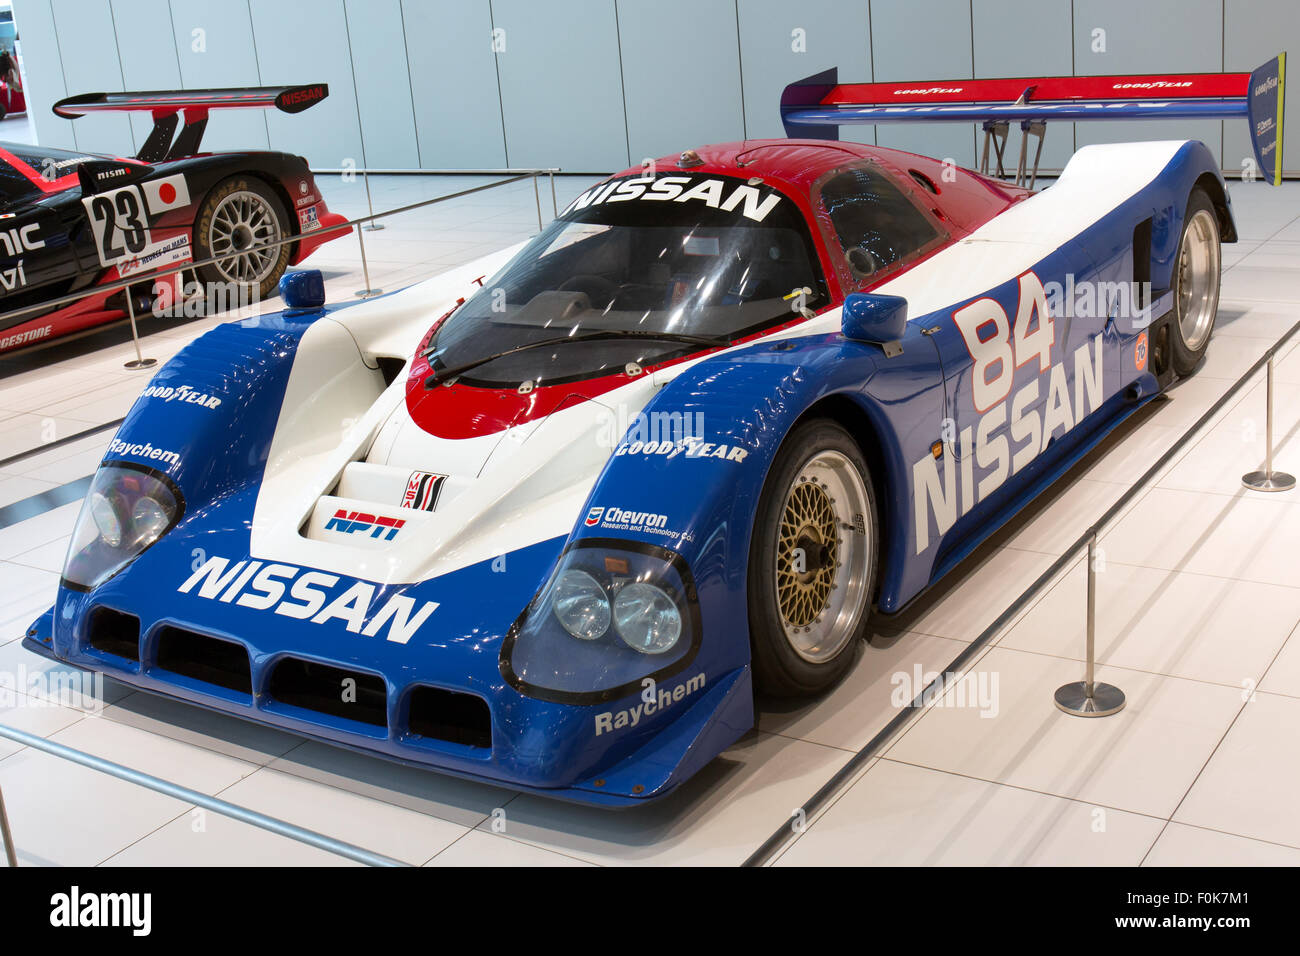 Nissan R90CK Front-left1 2015 Nissan Global Headquarters Gallery Stockfoto